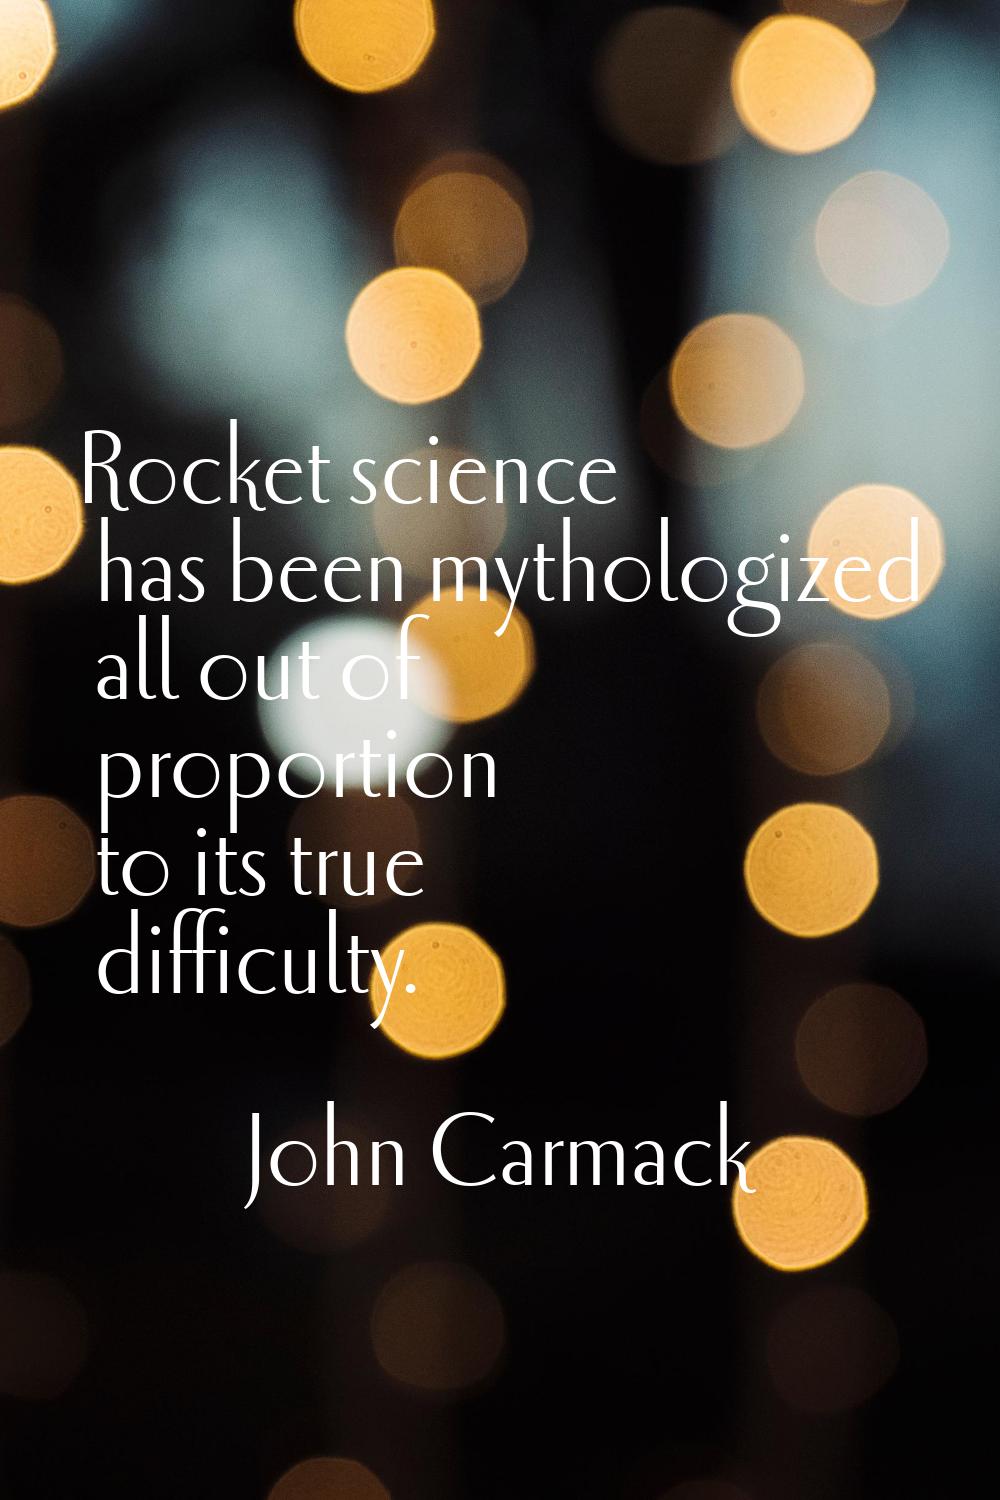 Rocket science has been mythologized all out of proportion to its true difficulty.